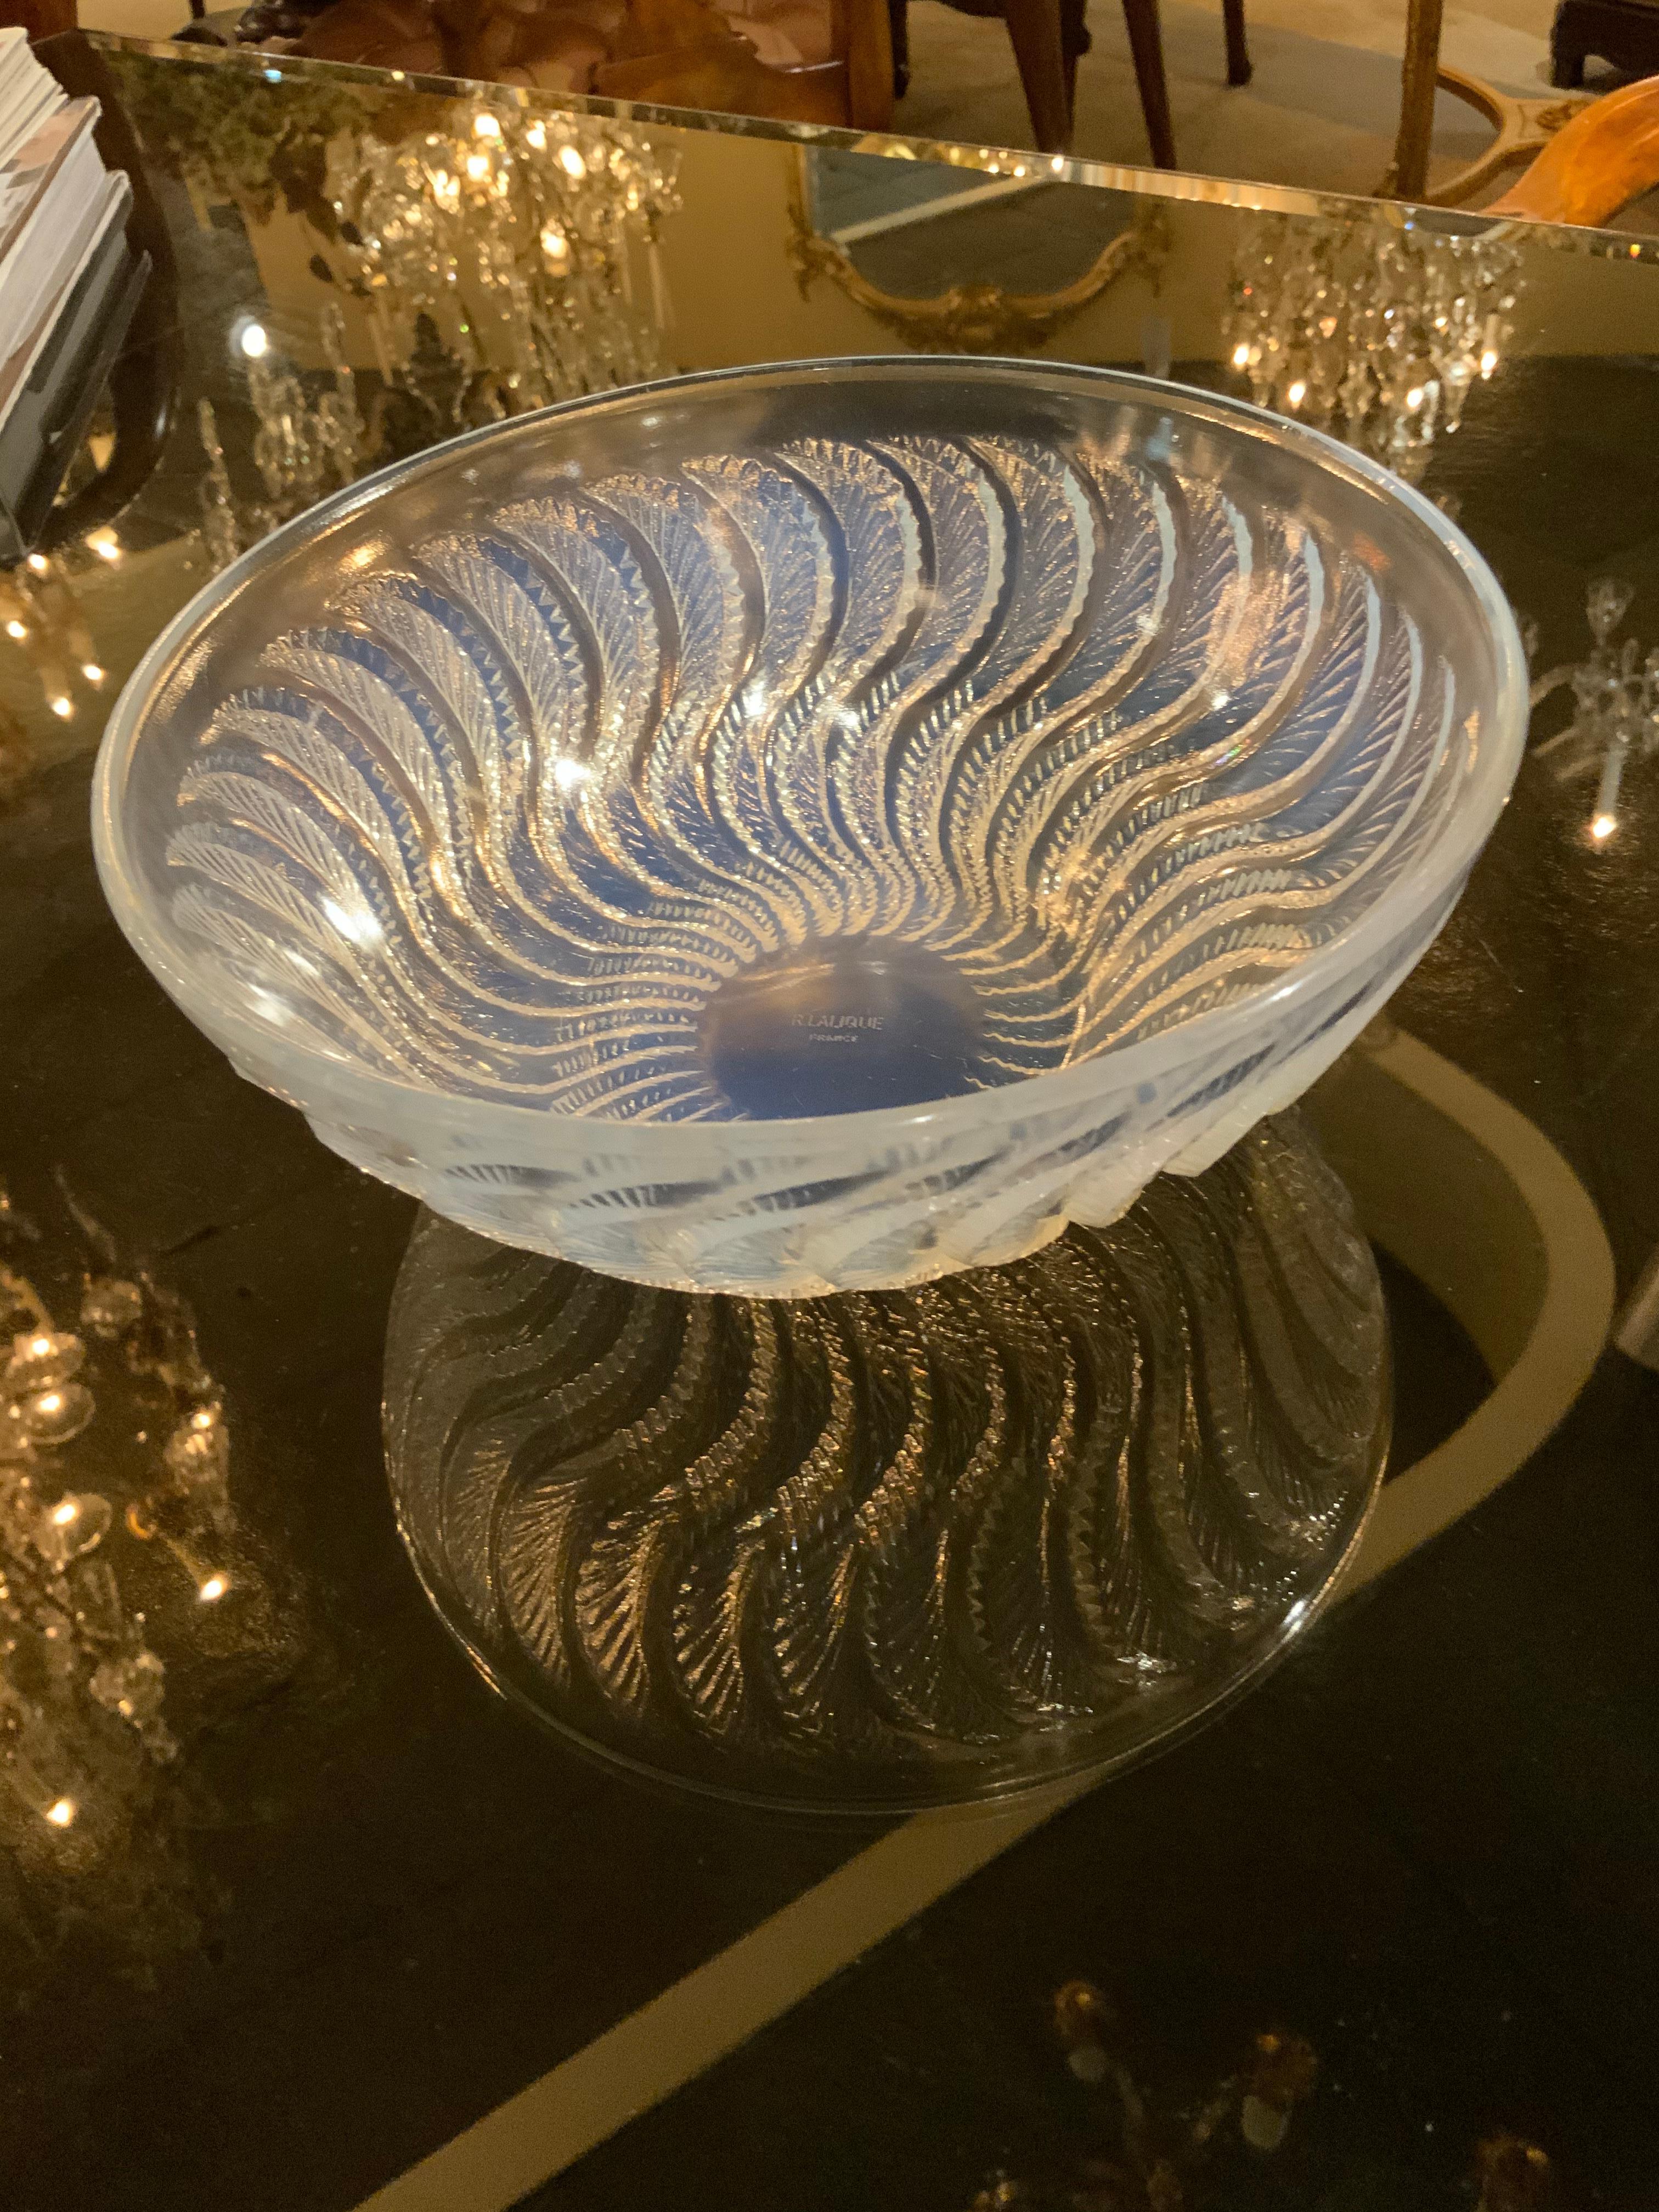 R Lalique bowl with an iridescent glow in a pale blue hue
Exquisite design and quality.